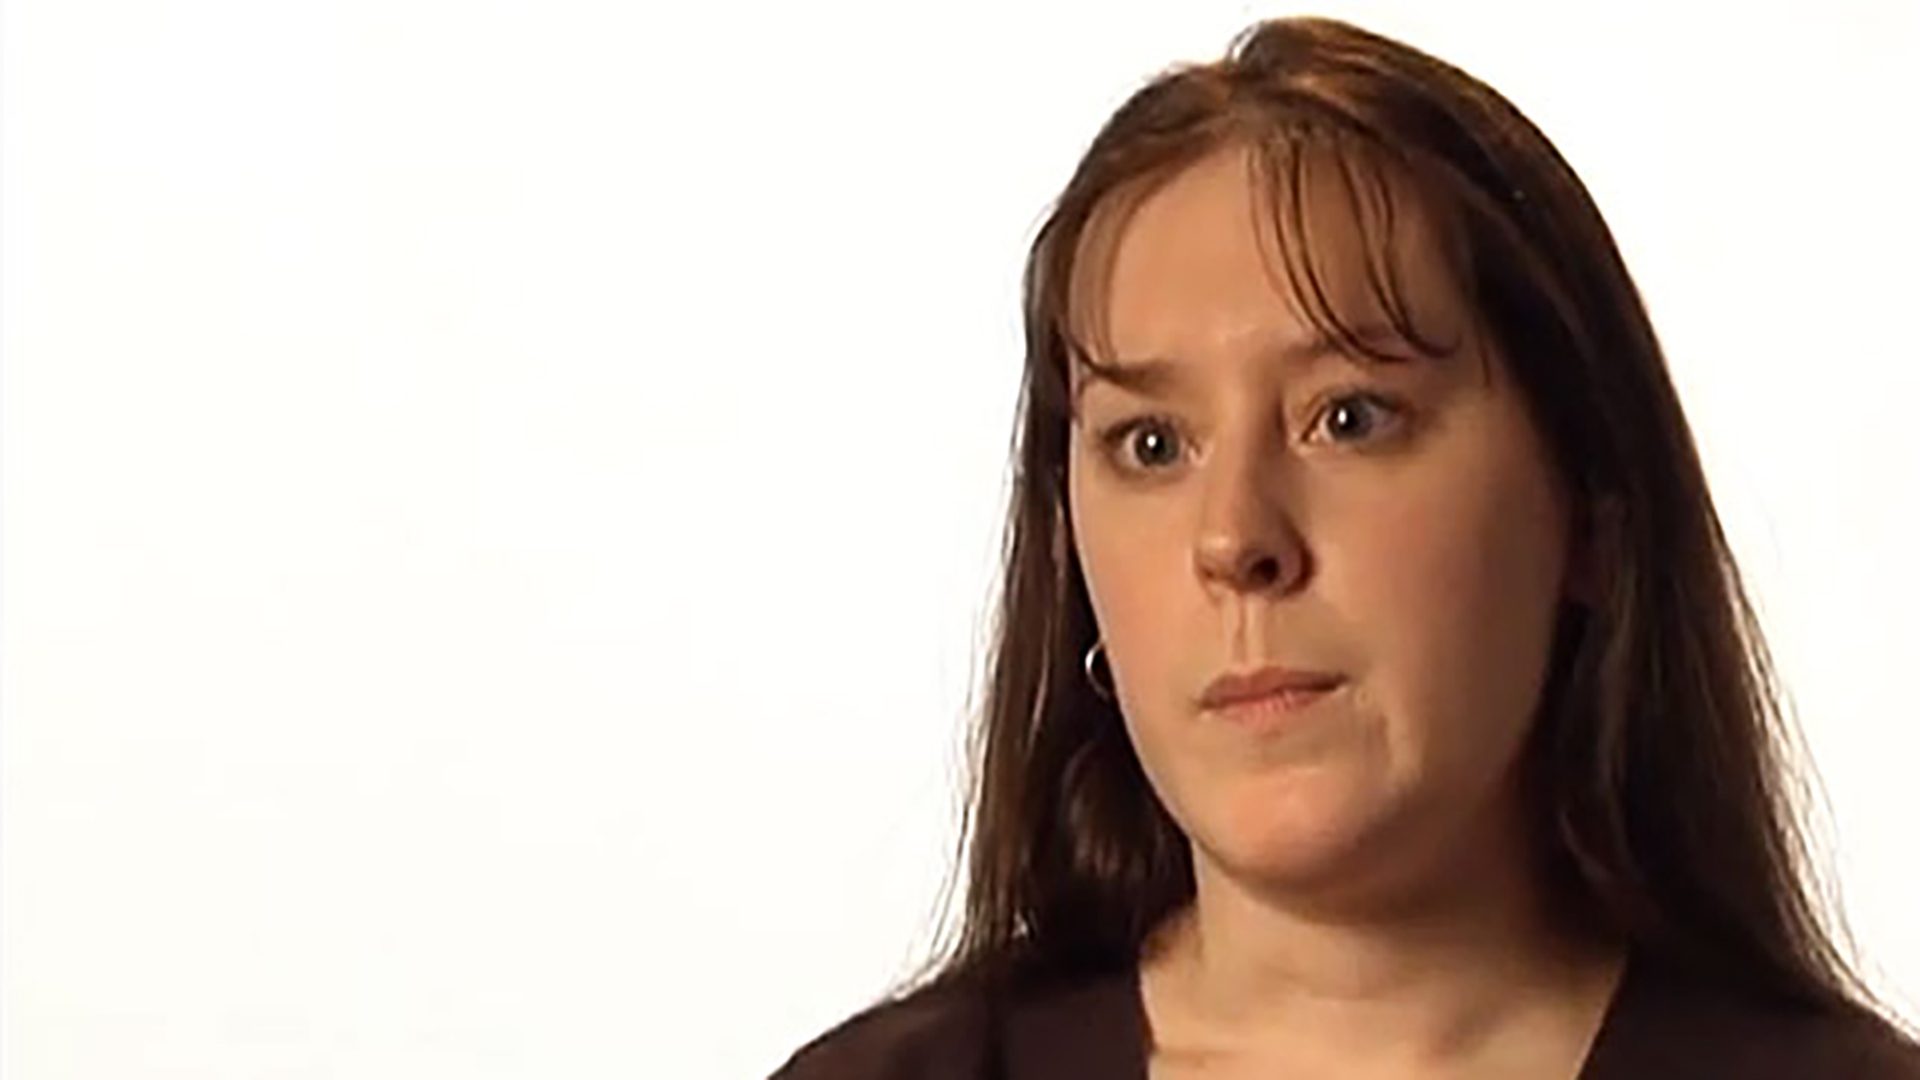 A young woman with dark hair and a dark shirt is interviewed against a white background.